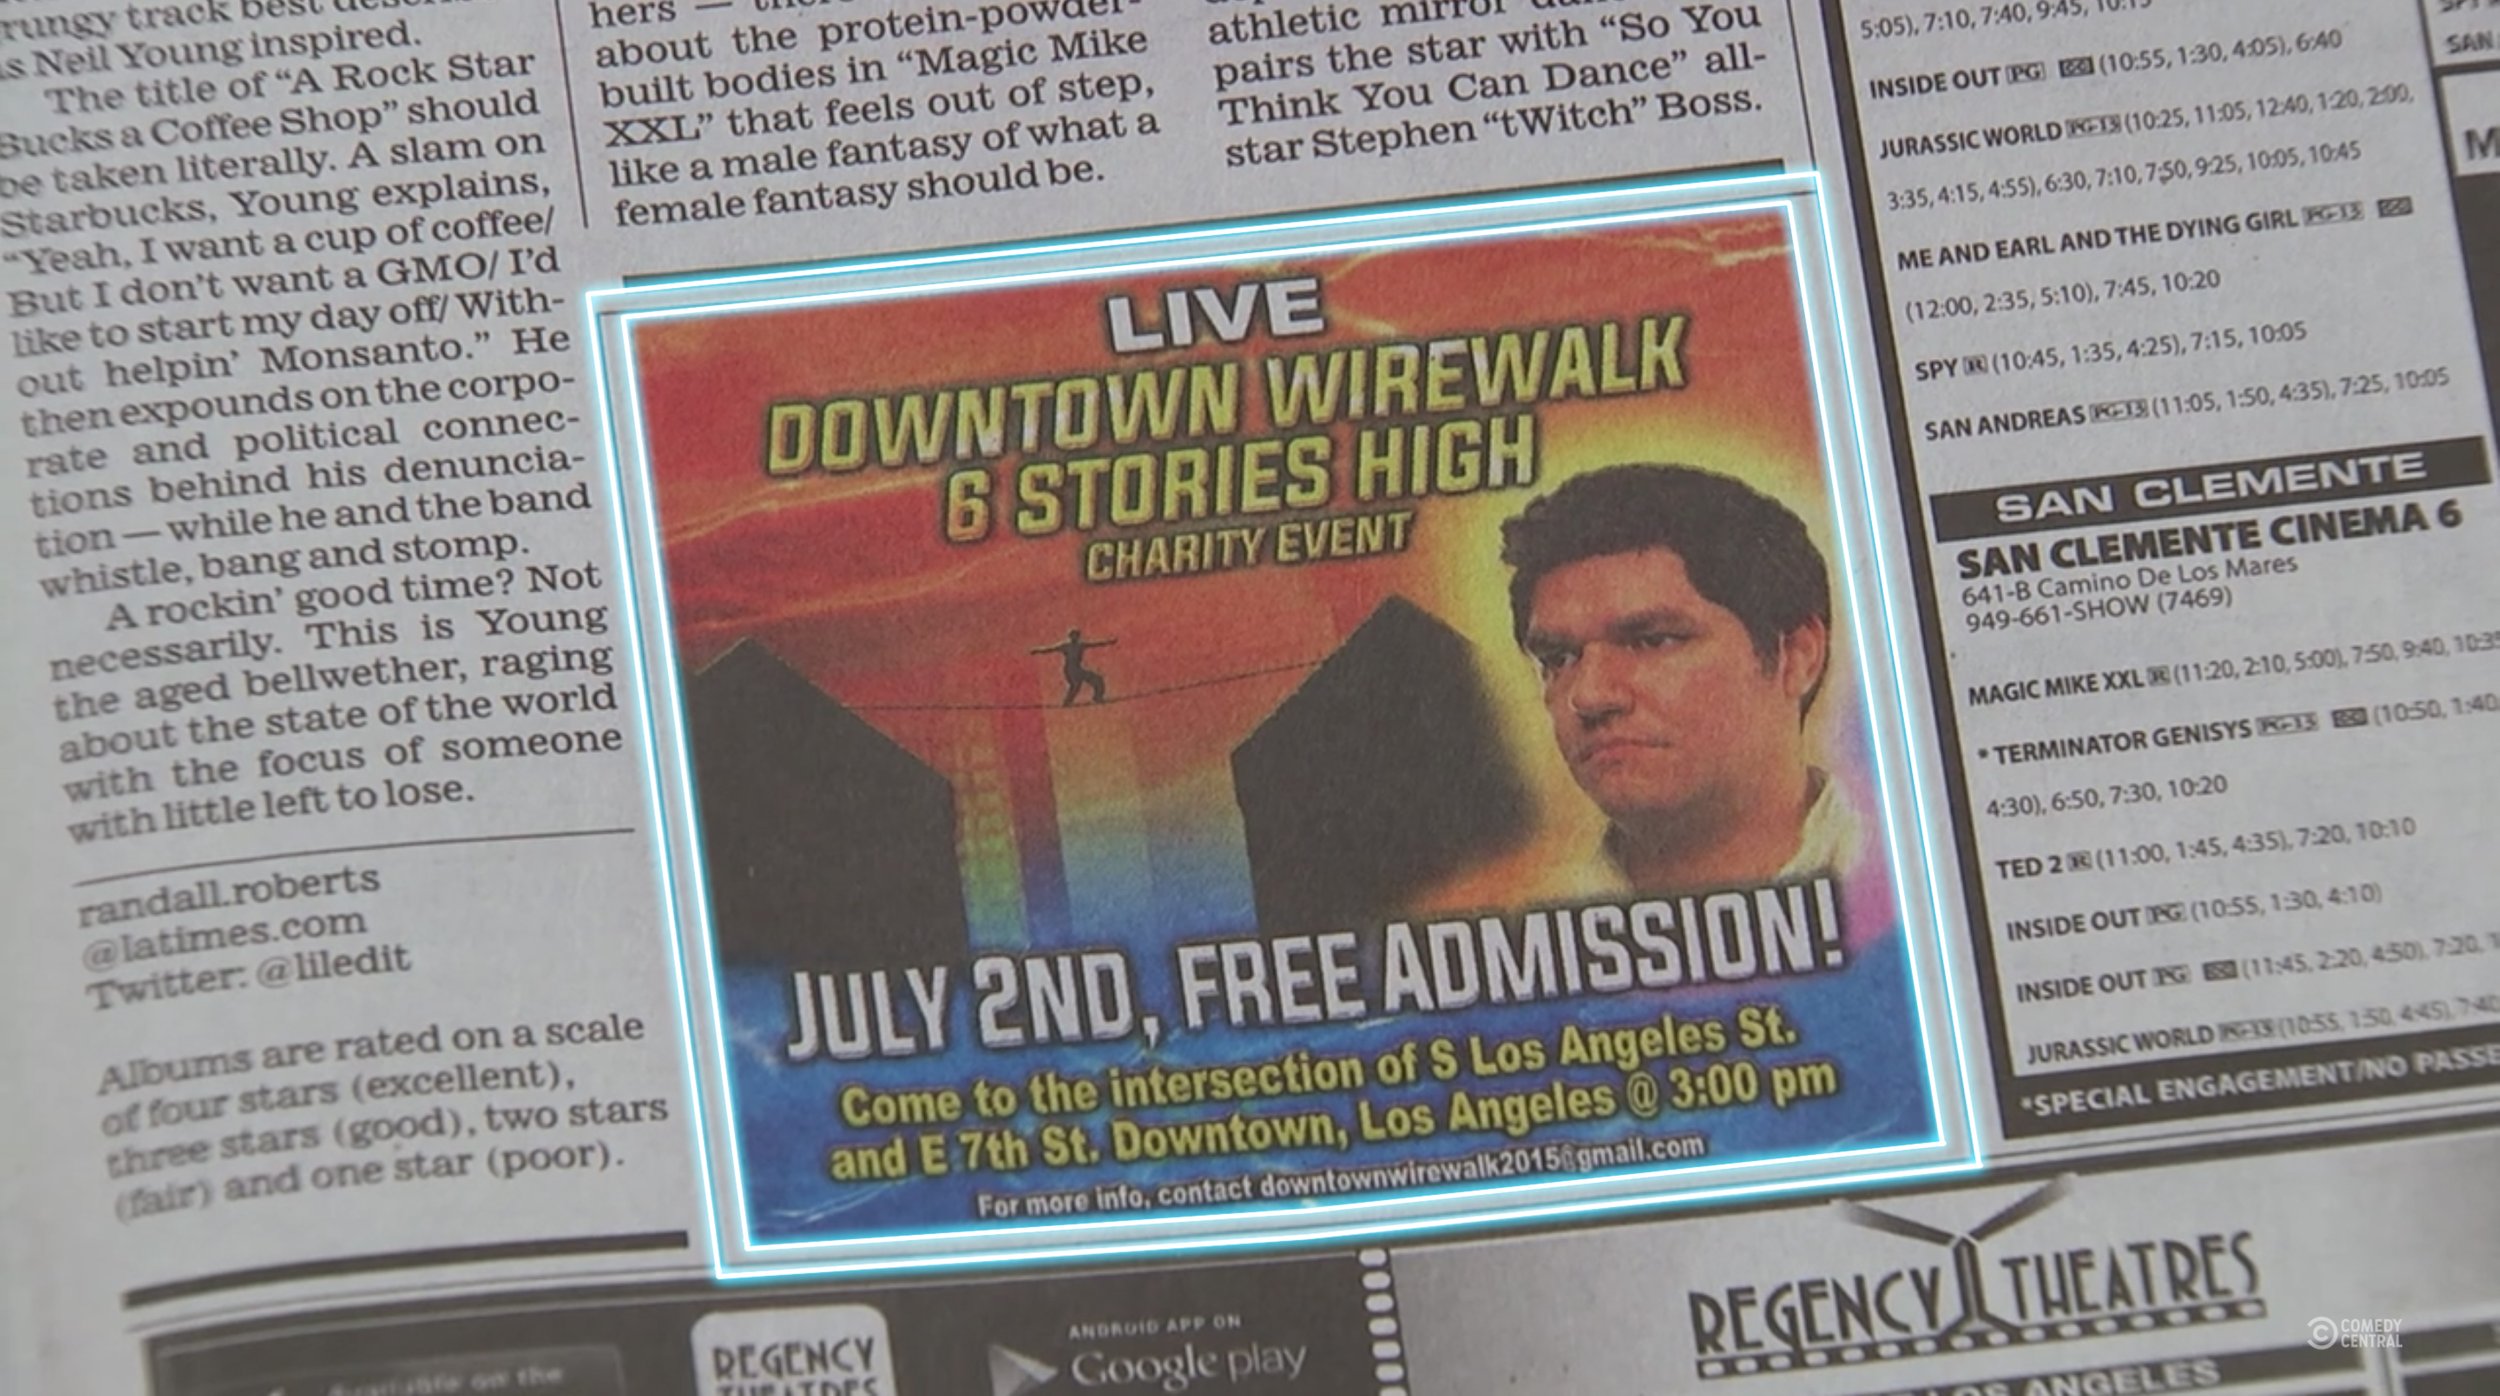 Los Angeles Times WireWalk Ad (featured in actual paper)